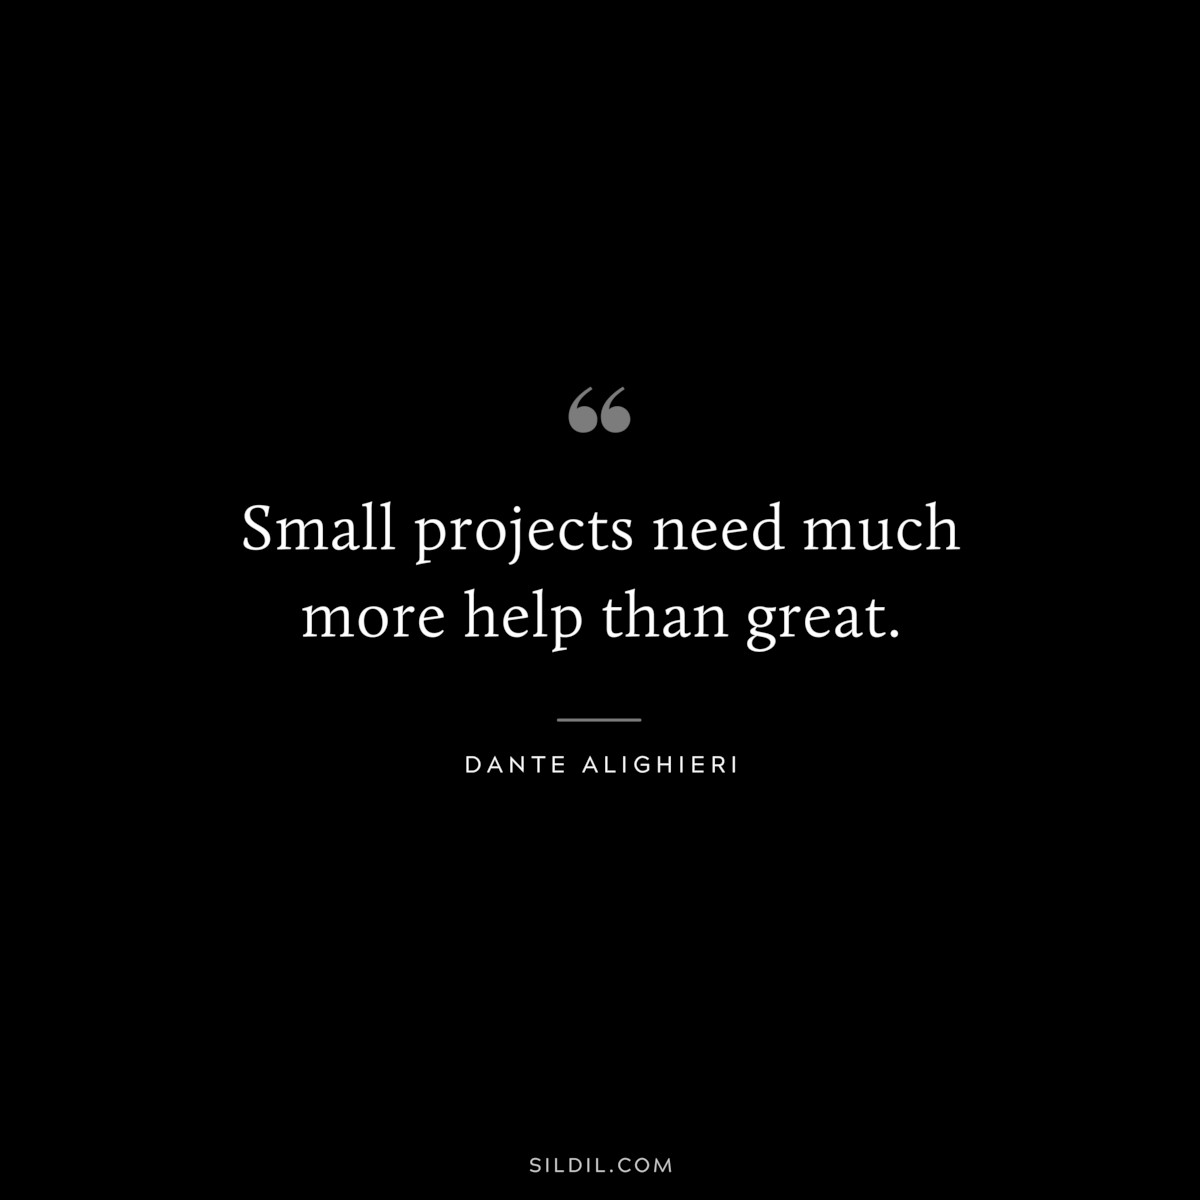 Small projects need much more help than great. ― Dante Alighieri